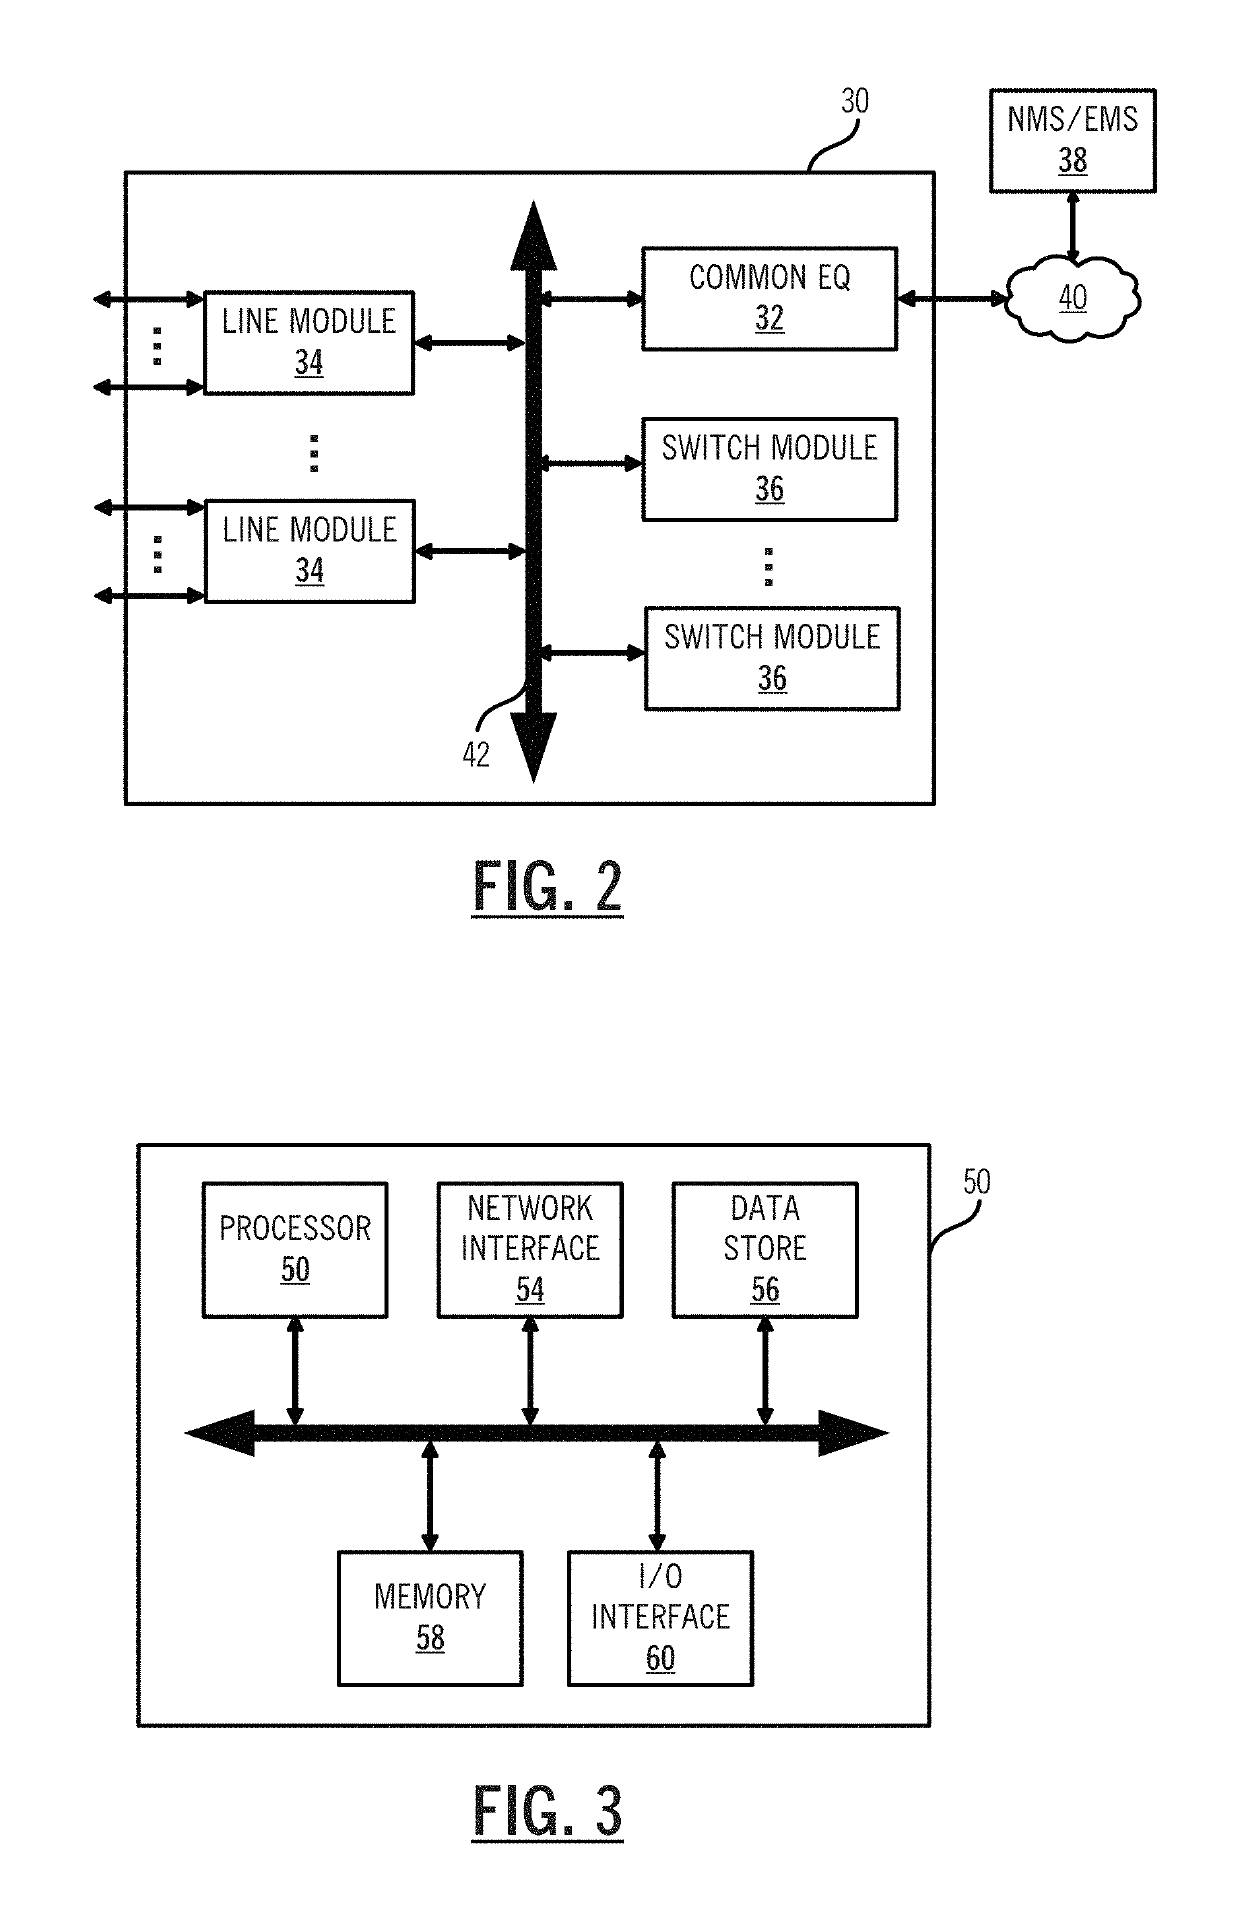 Partial survivability for multi-carrier and multi-module optical interfaces